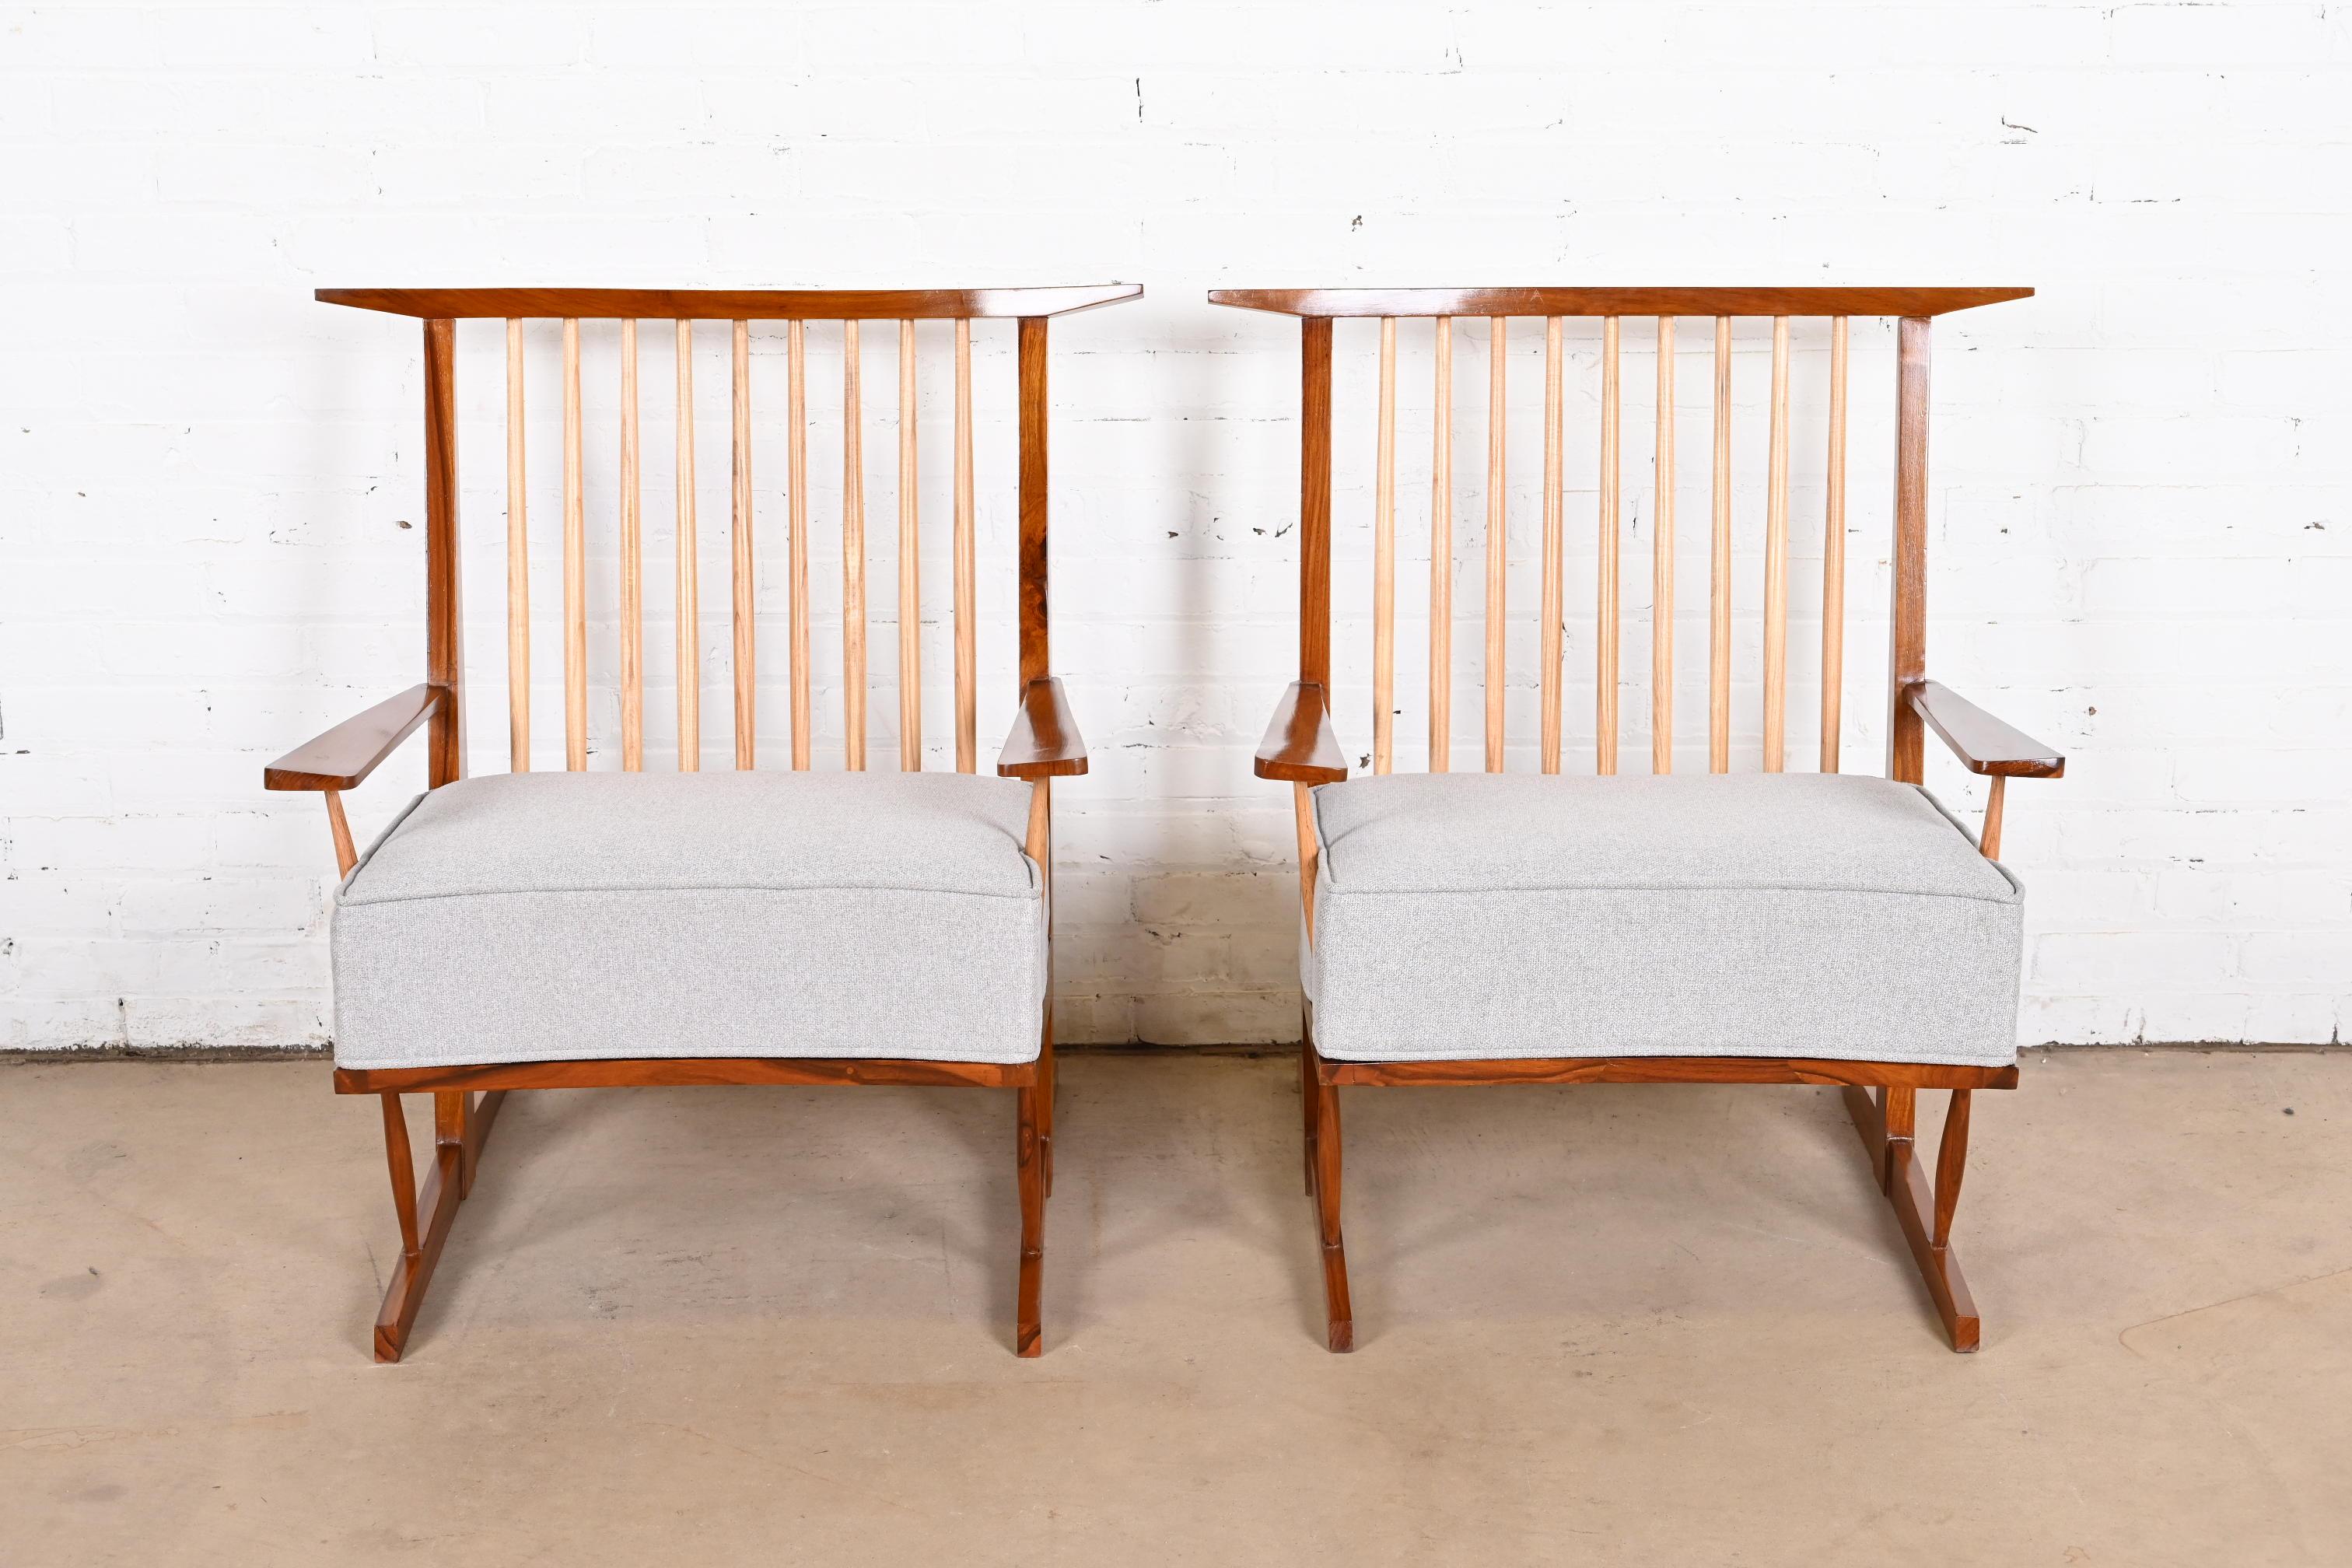 20th Century Conoid Lounge Chairs in Sculpted Walnut After George Nakashima, Pair For Sale